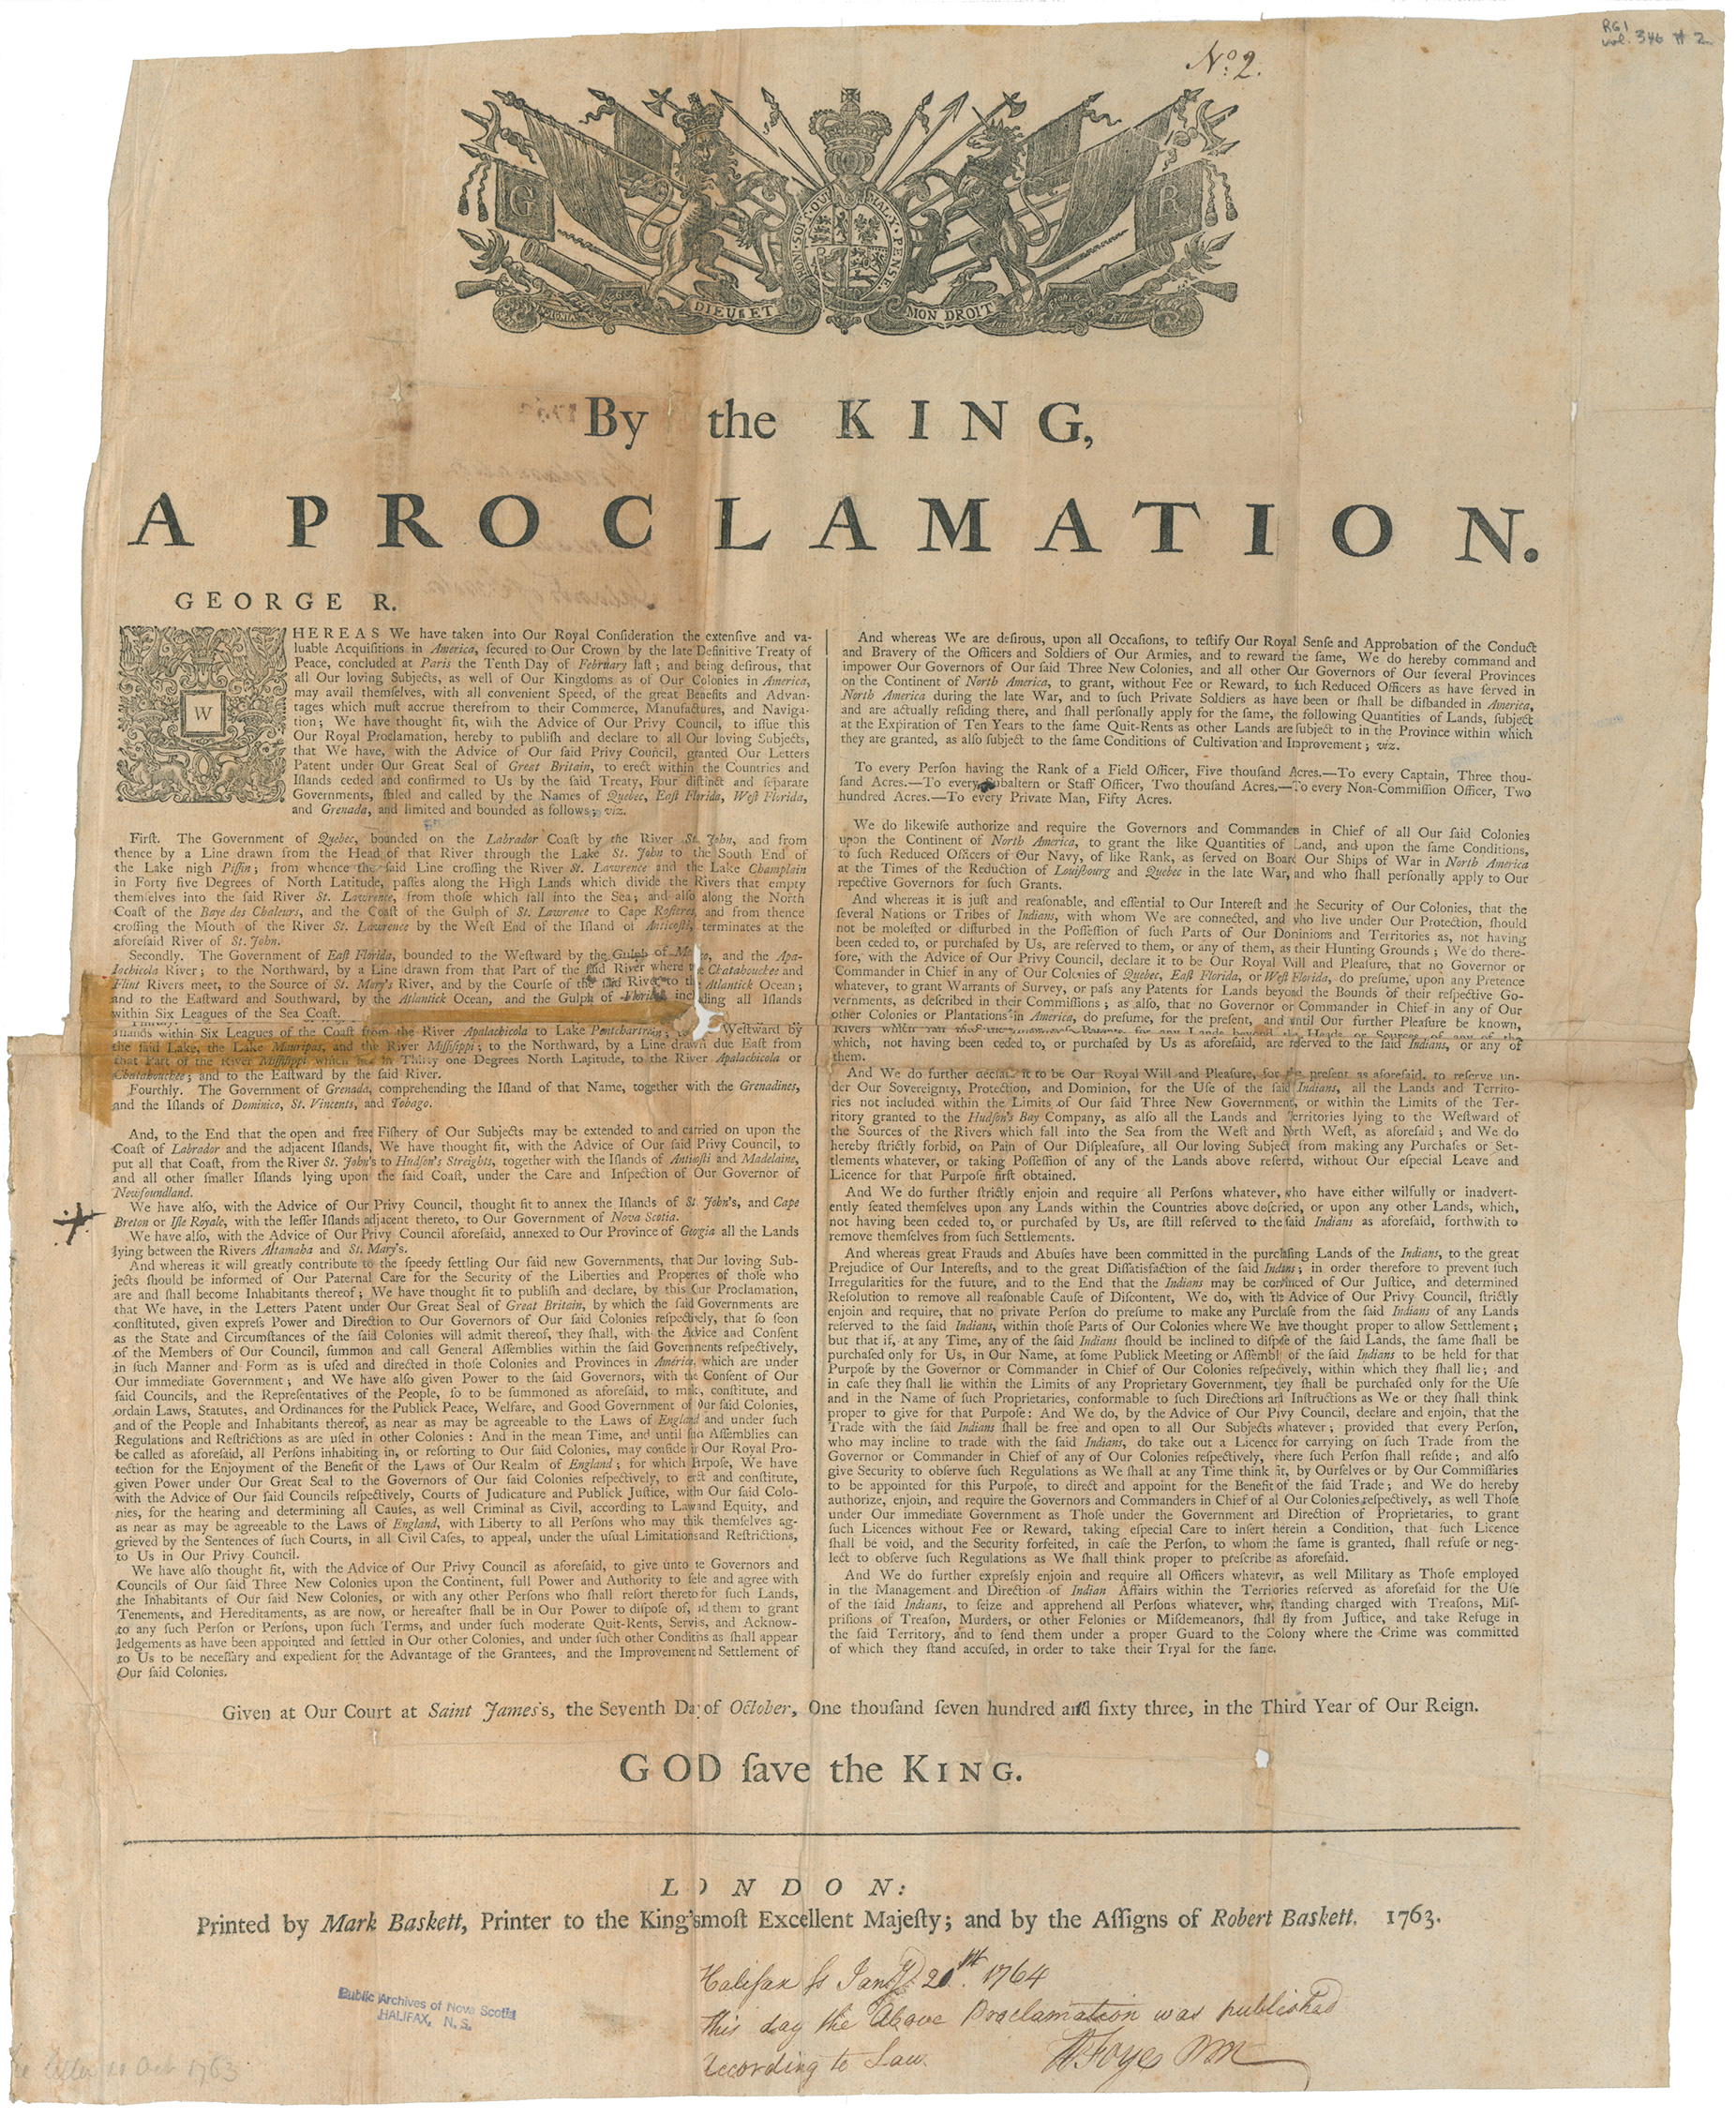 mikmaq : By the King, A Proclamation. 1763